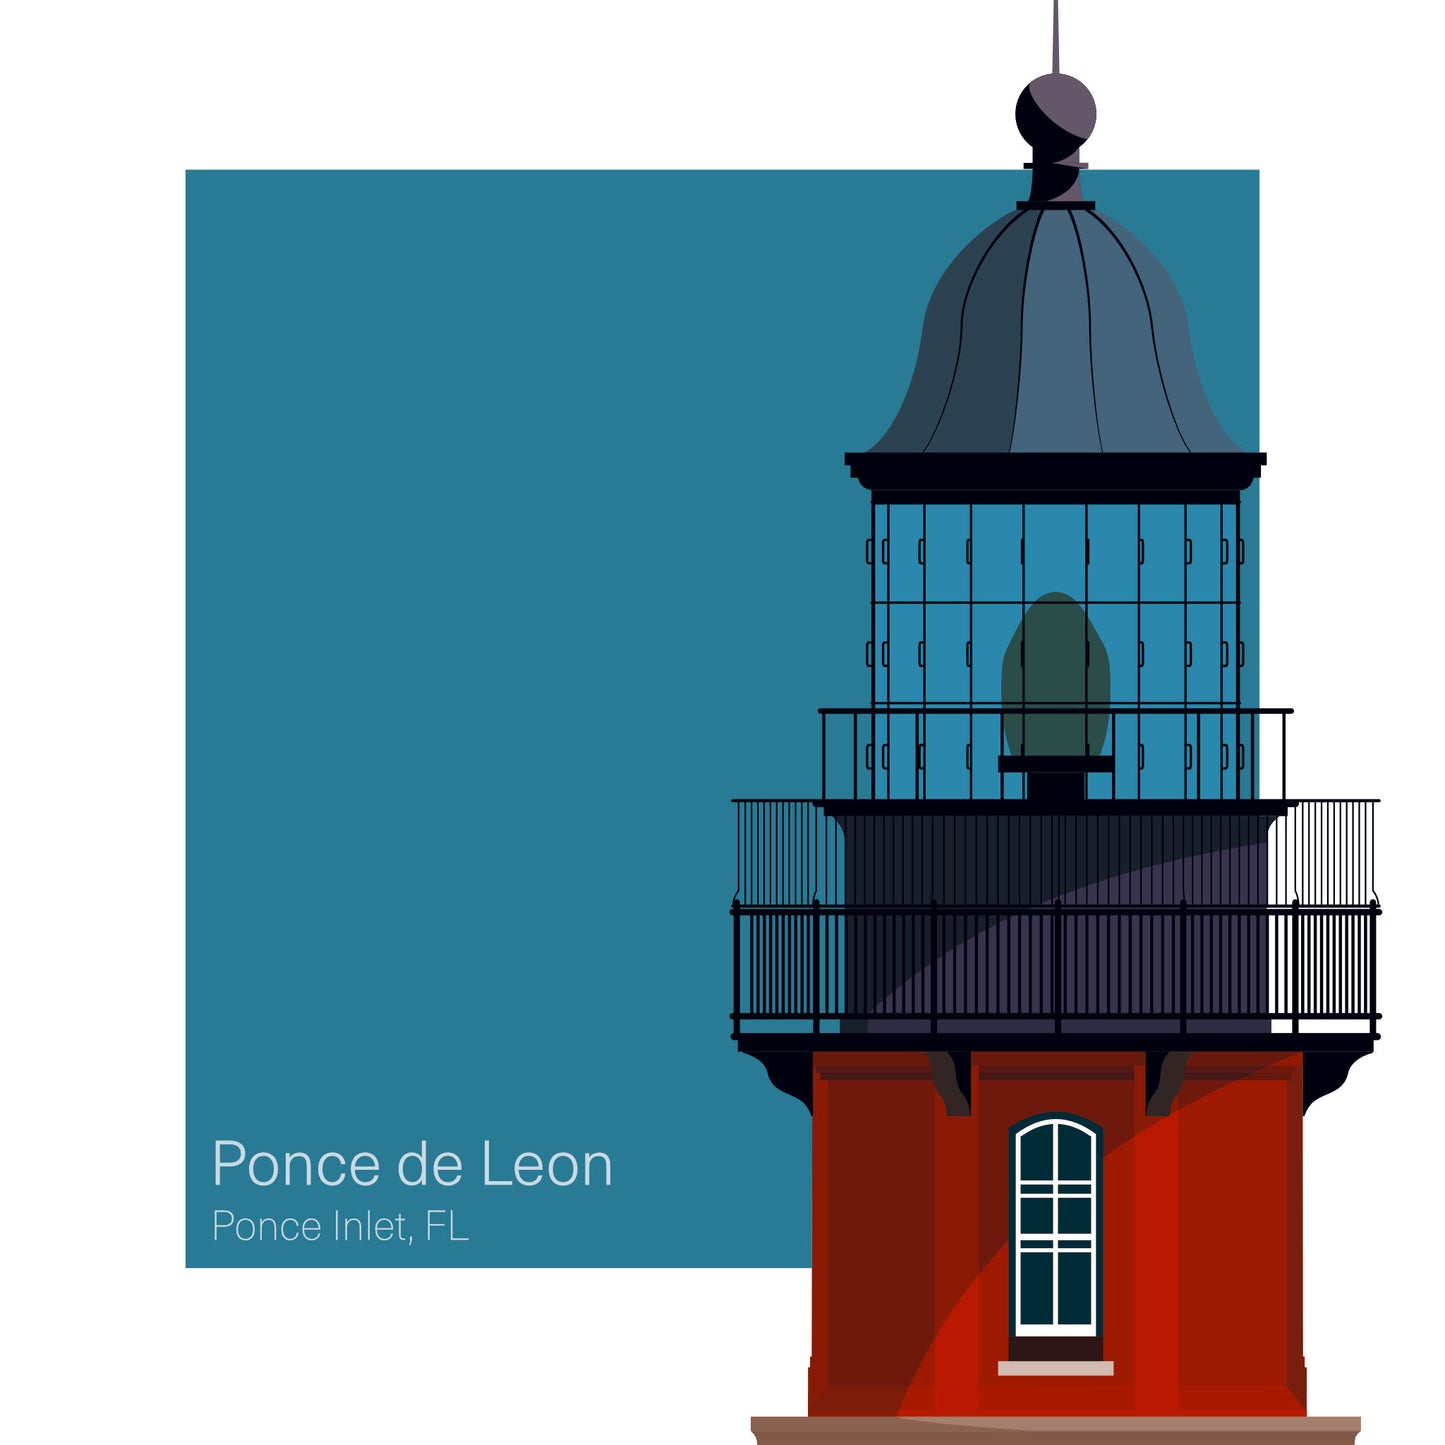 Illustration of the Ponce de Leon Inlet lighthouse, FL, USA. On a white background with aqua blue square as a backdrop.